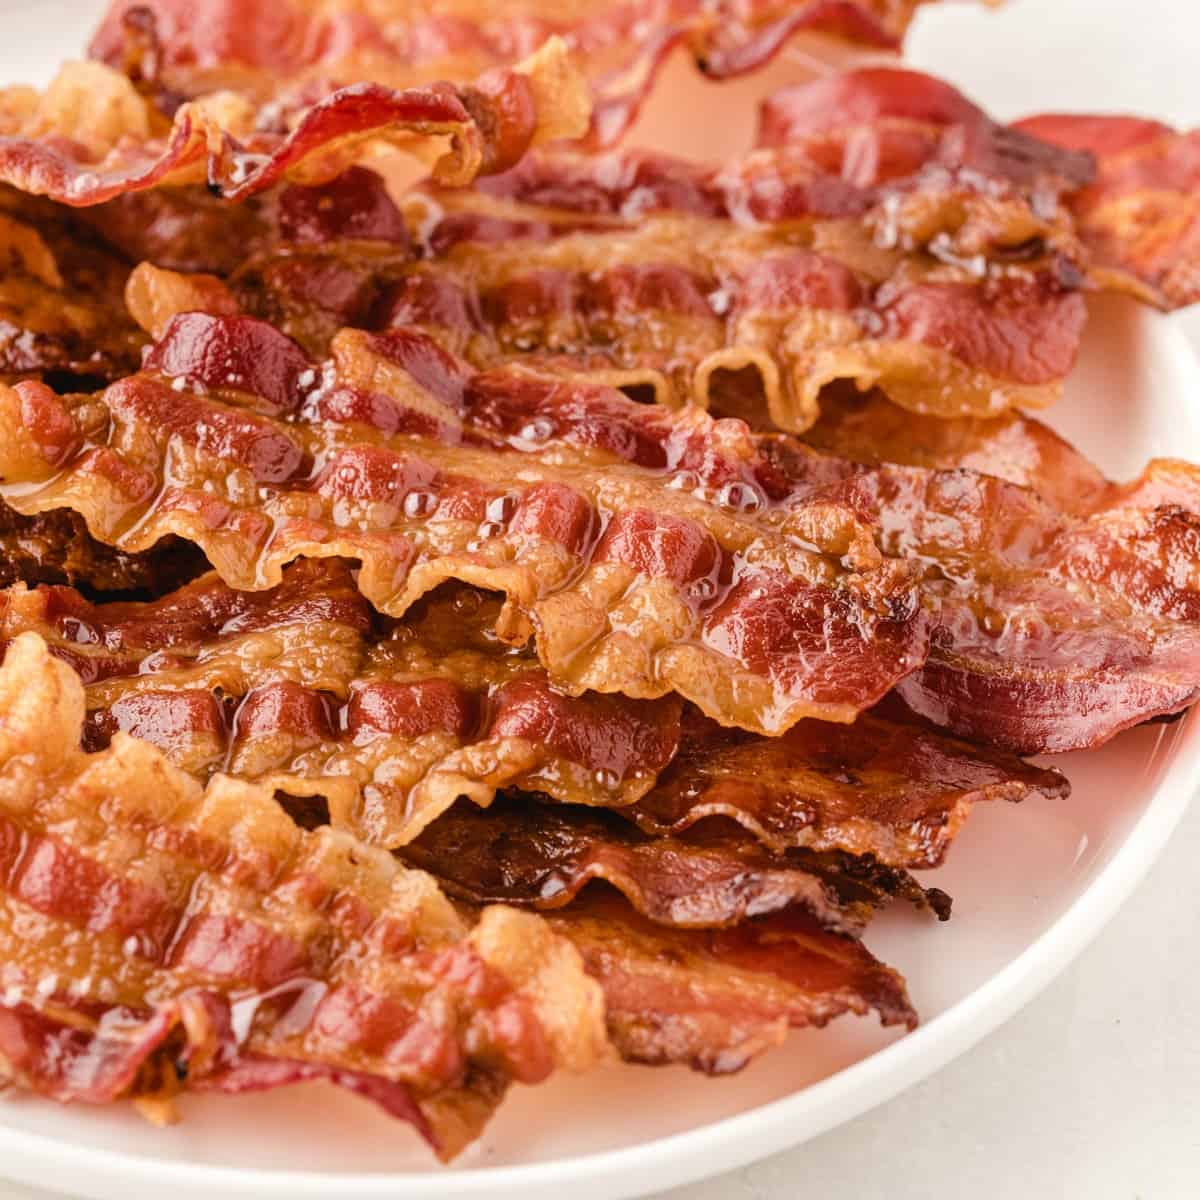 https://princesspinkygirl.com/wp-content/uploads/2020/11/How-to-make-bacon-in-the-oven.jpg